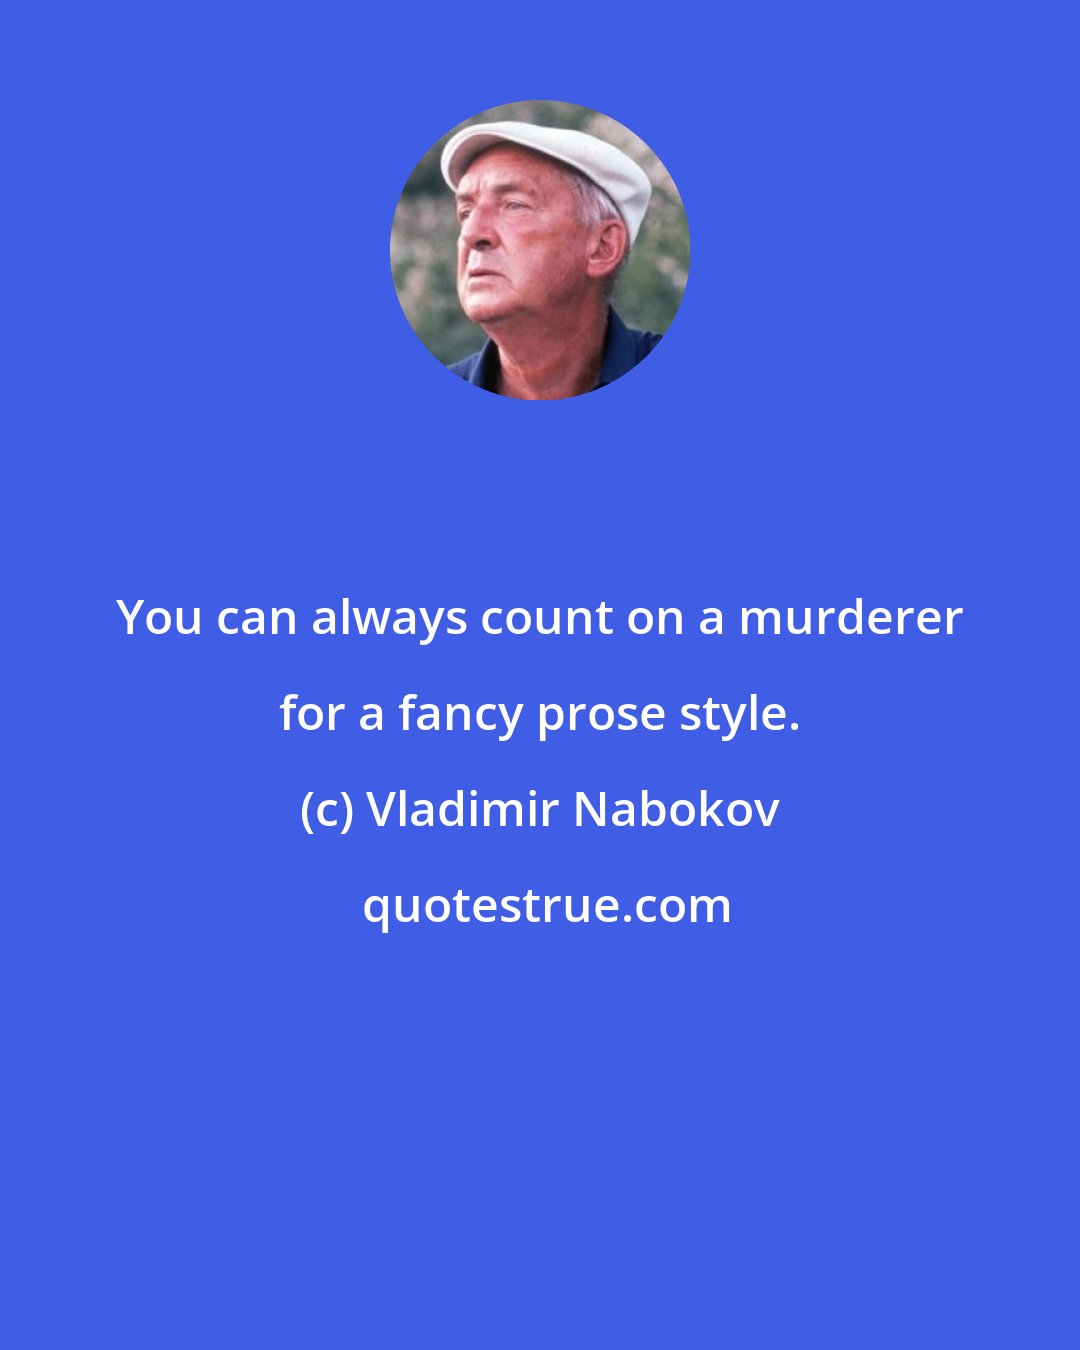 Vladimir Nabokov: You can always count on a murderer for a fancy prose style.